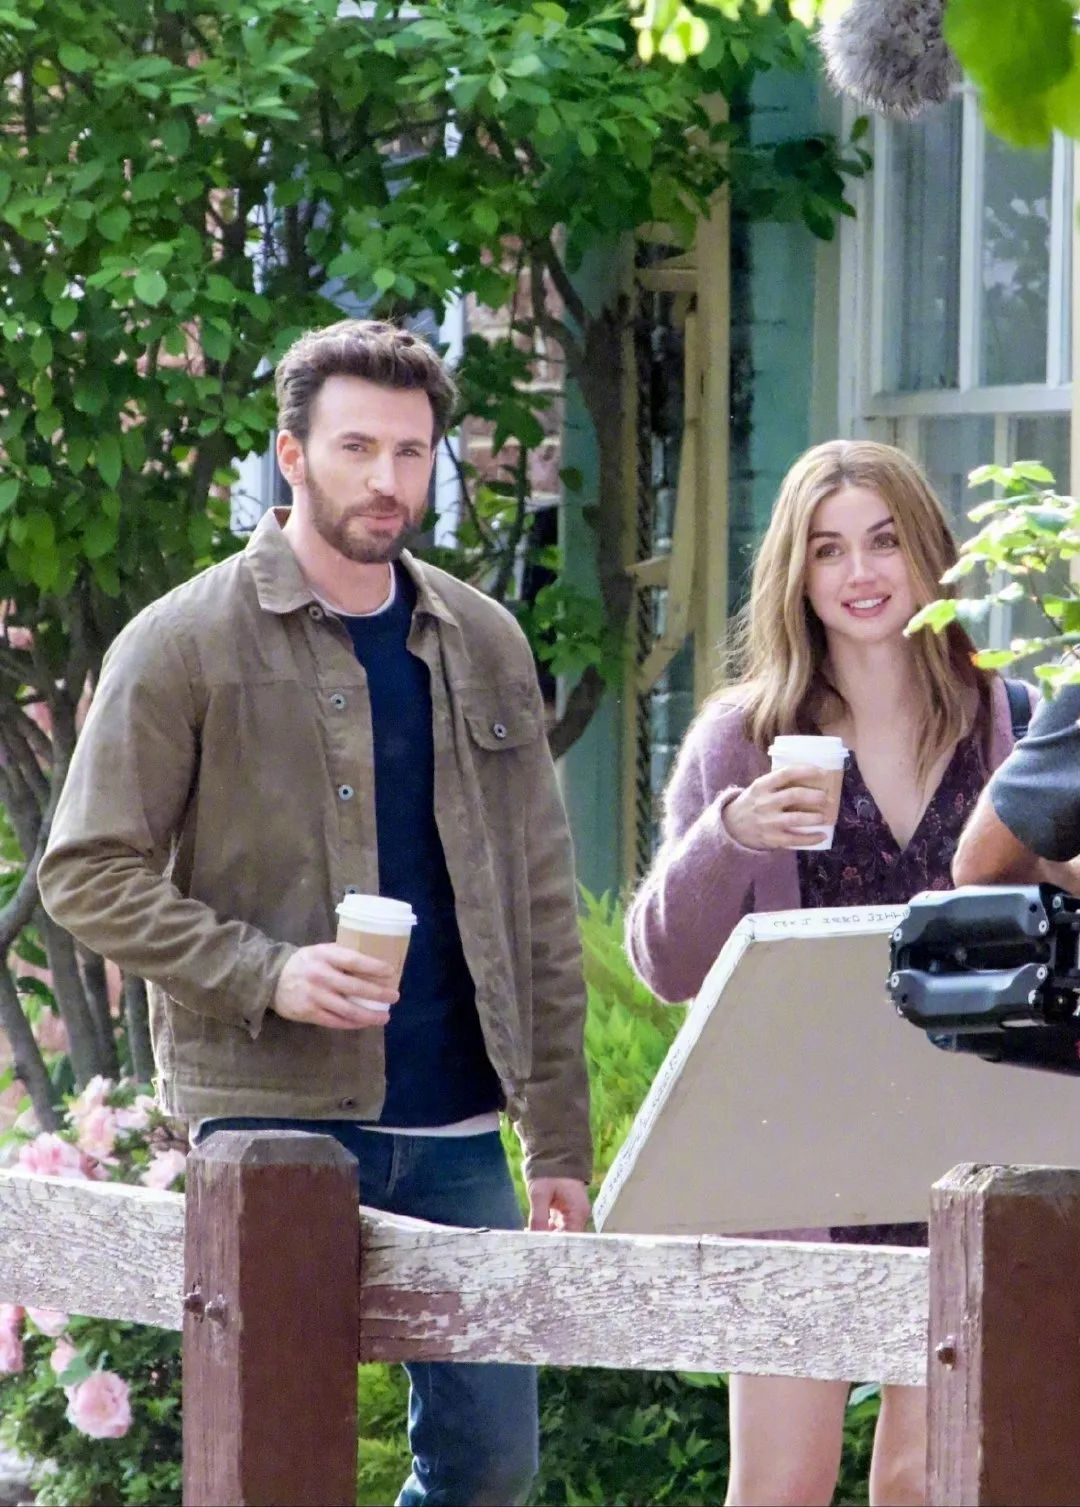 Apple Original Films unveils trailer for “Ghosted,” the highly anticipated  romantic action-adventure film starring Chris Evans and Ana de Armas -  Apple TV+ Press